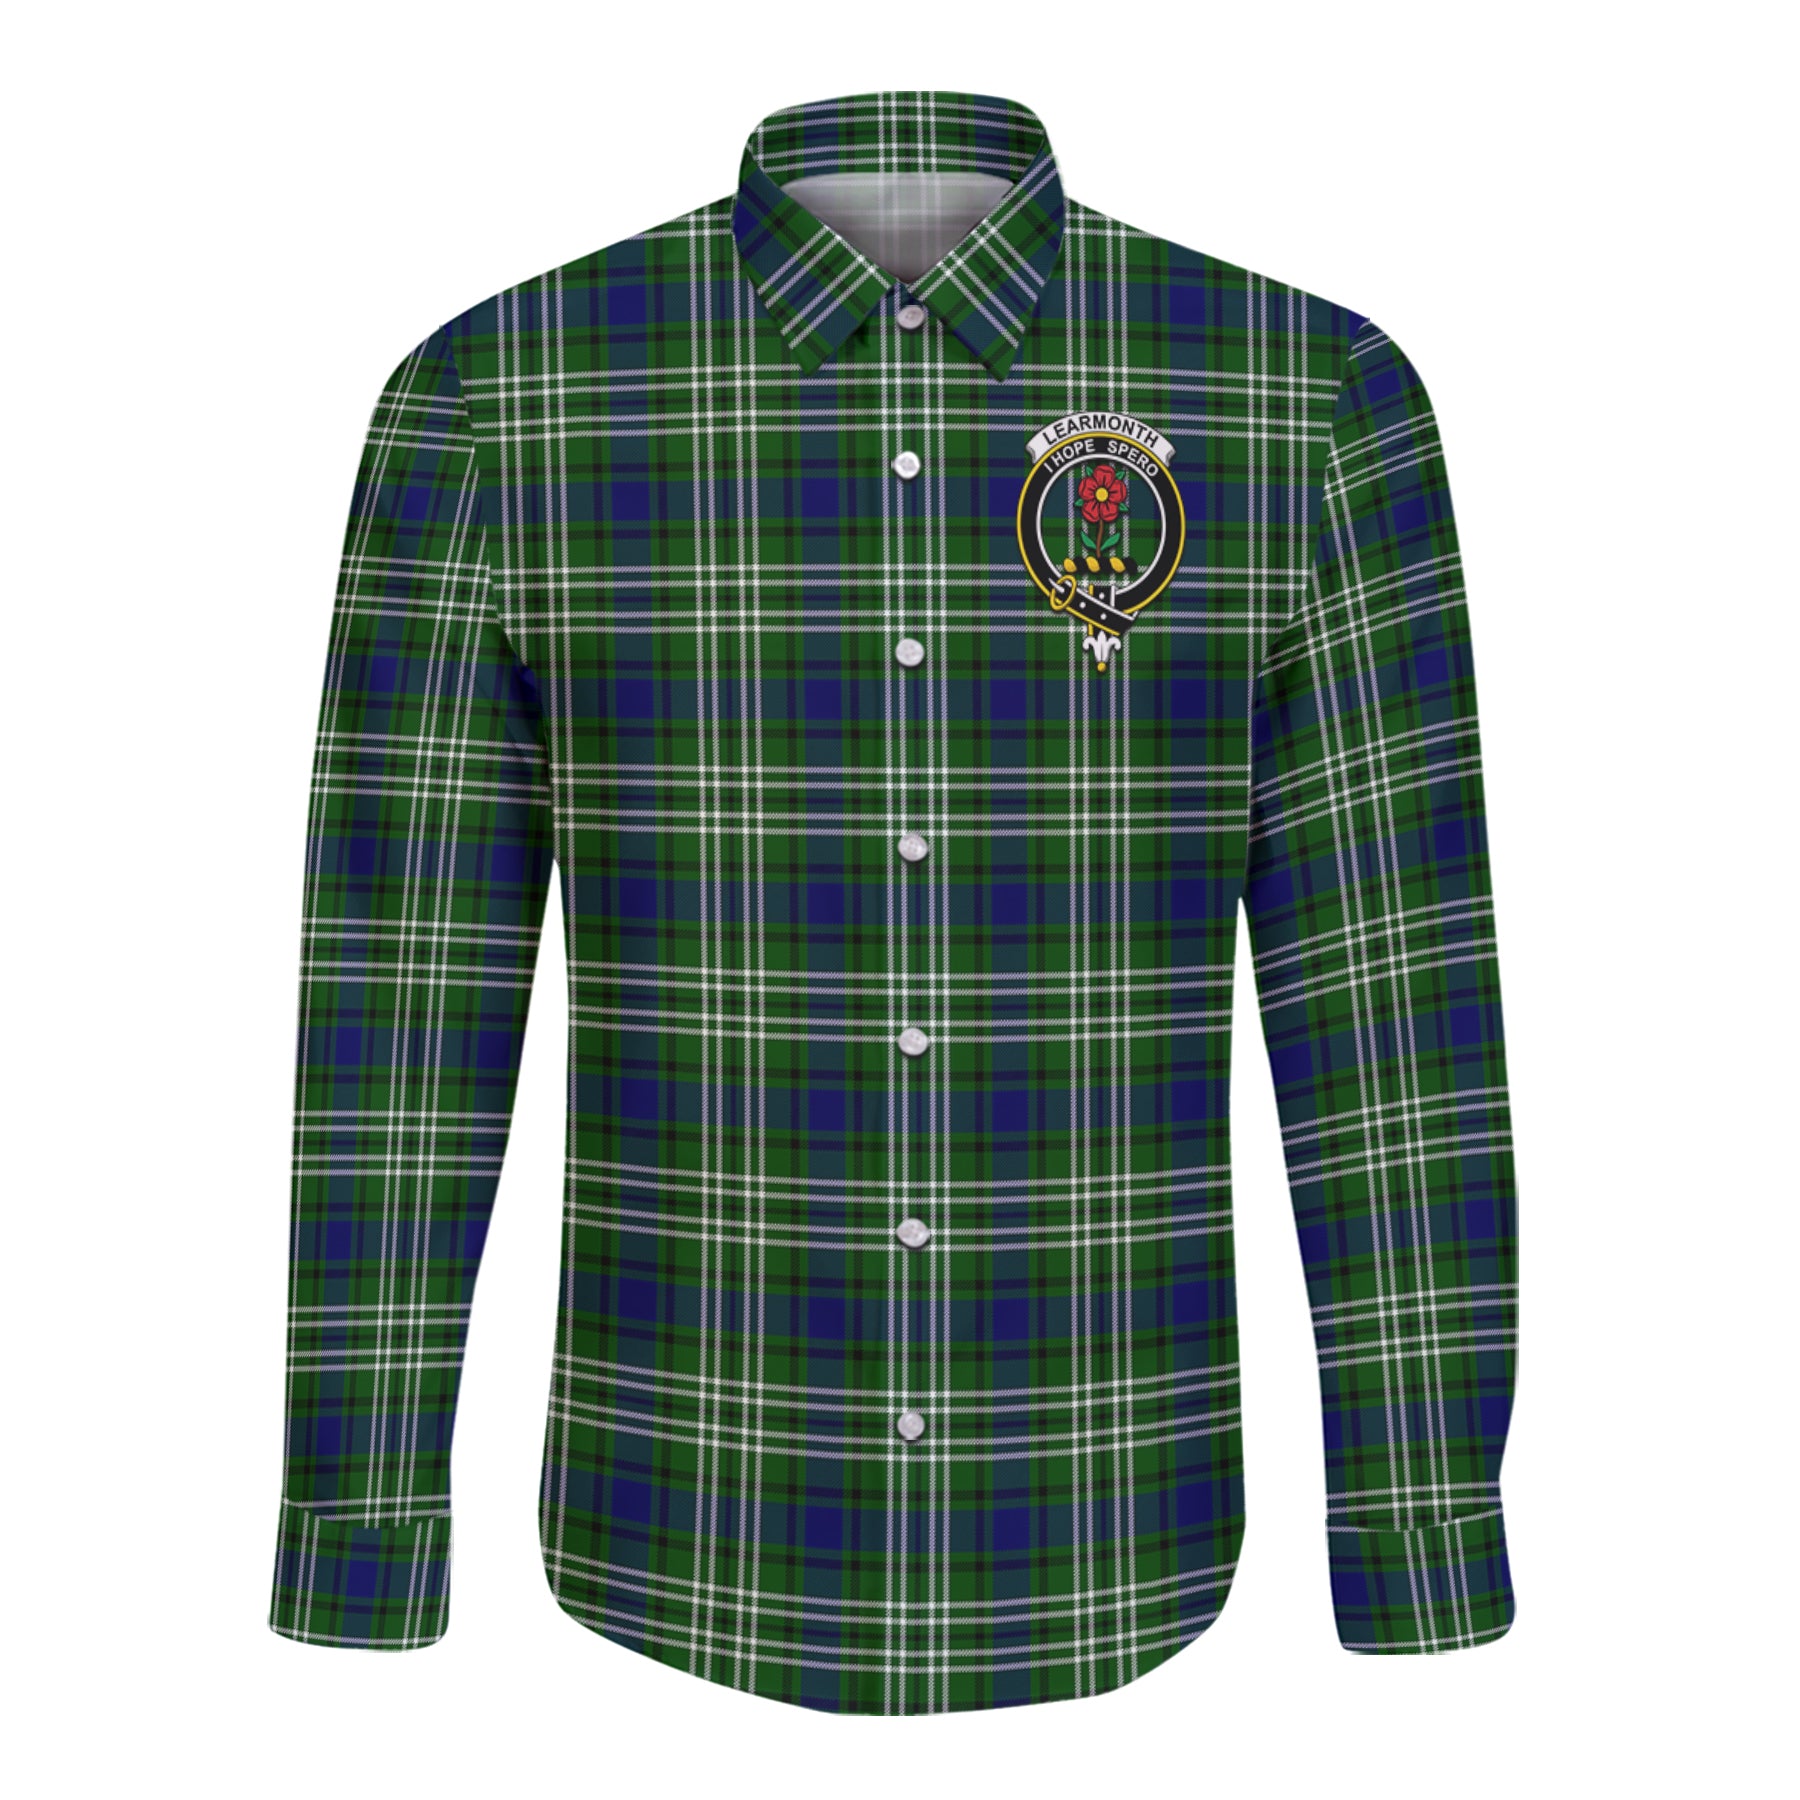 Learmonth Tartan Long Sleeve Button Up Shirt with Scottish Family Crest K23